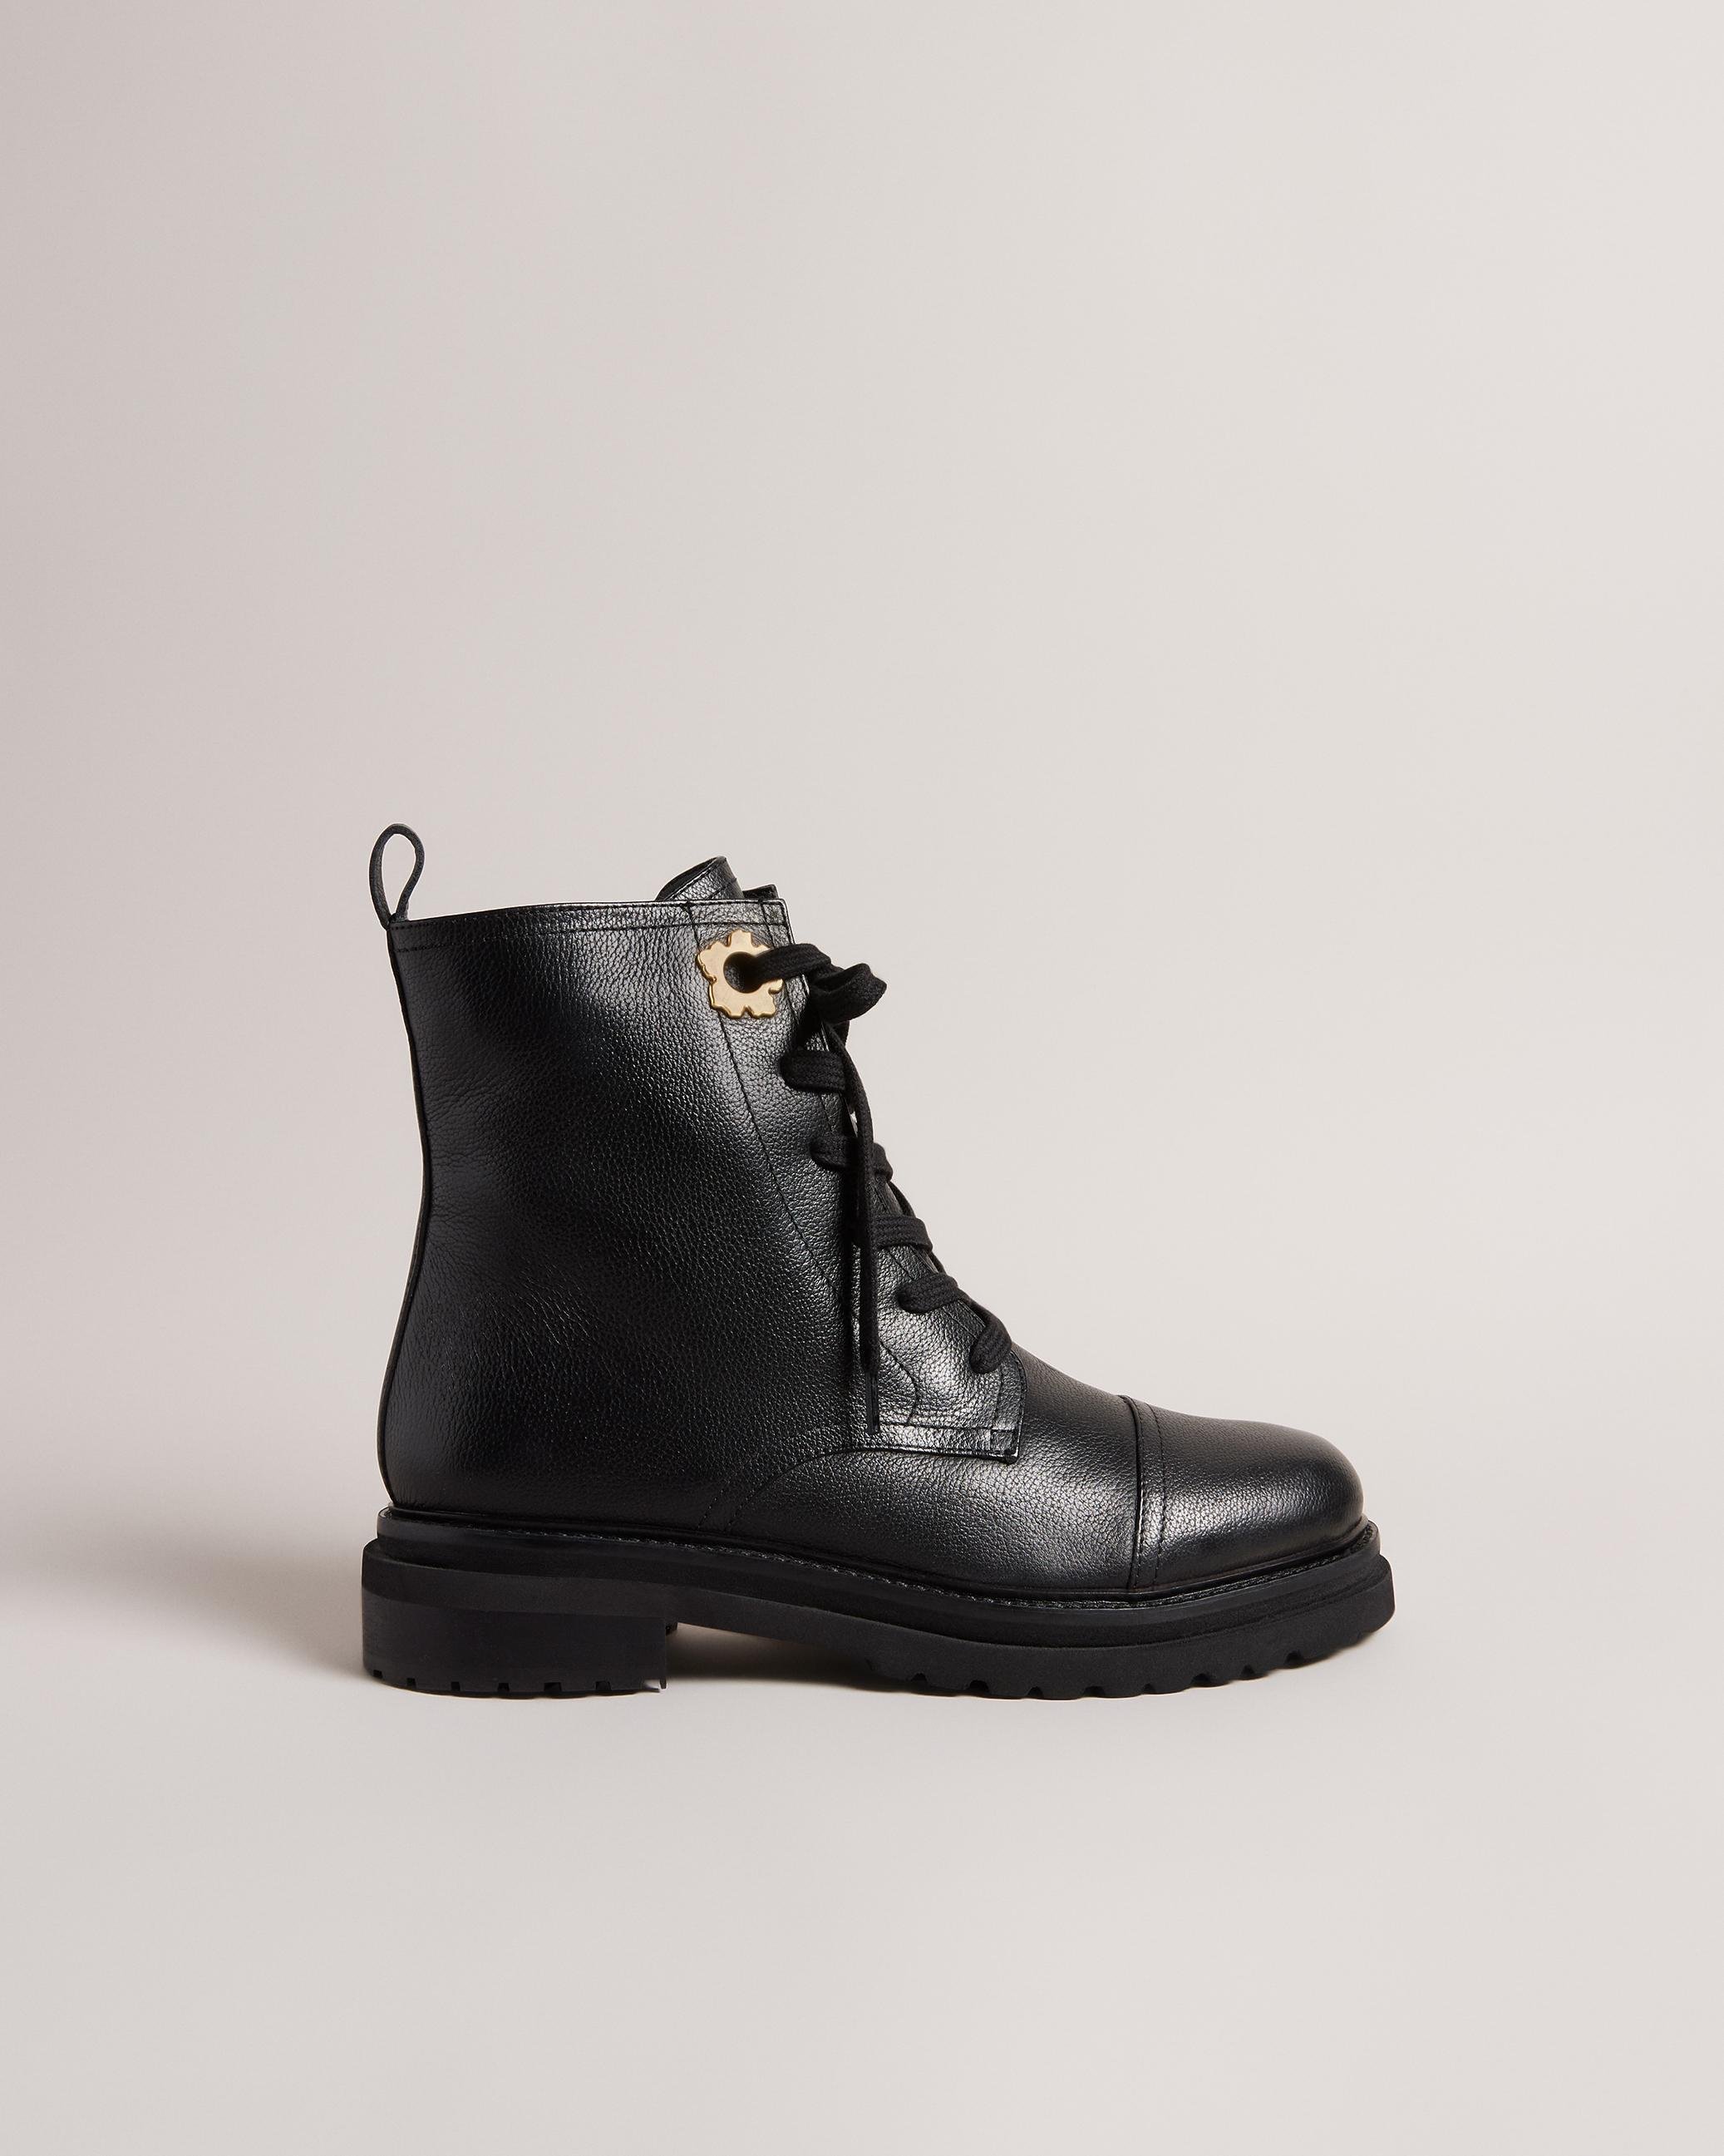 Leather Biker Boots - DARCYO - Black by TED BAKER | jellibeans